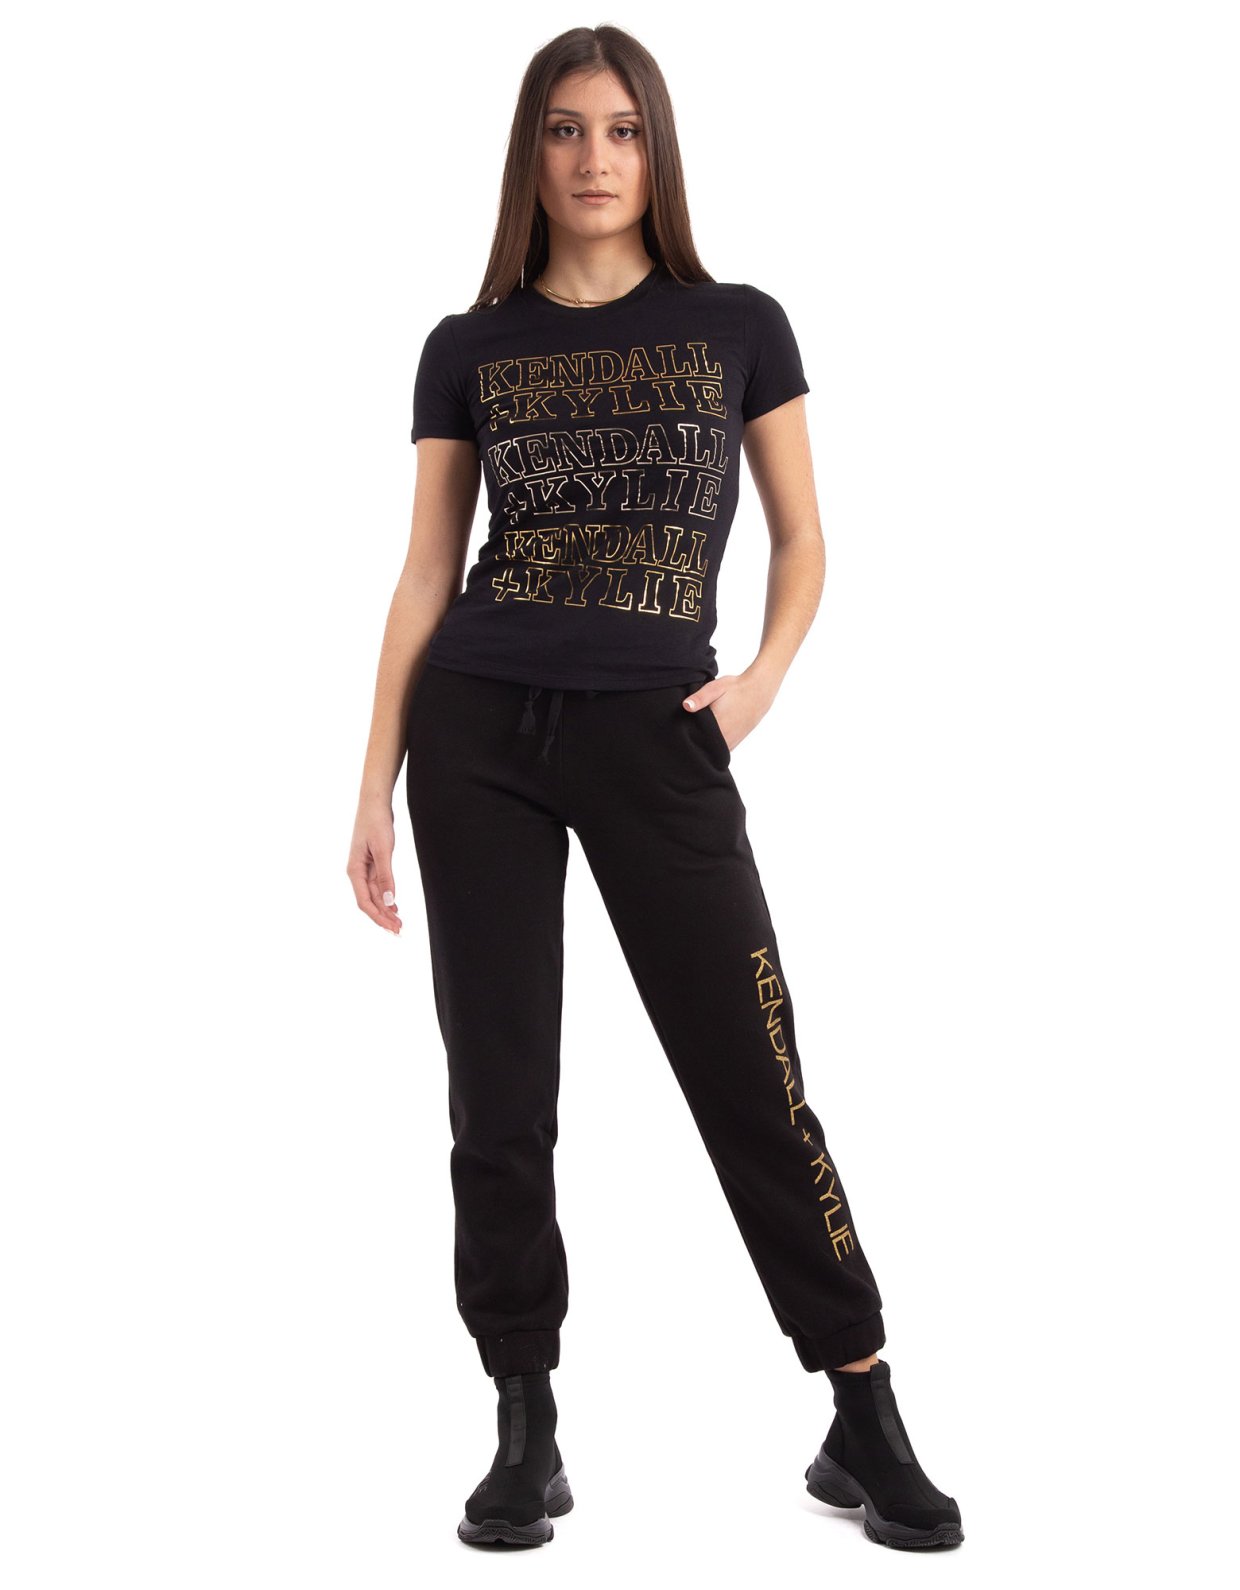 Kendall + Kylie Basic embroidered t-shirt black